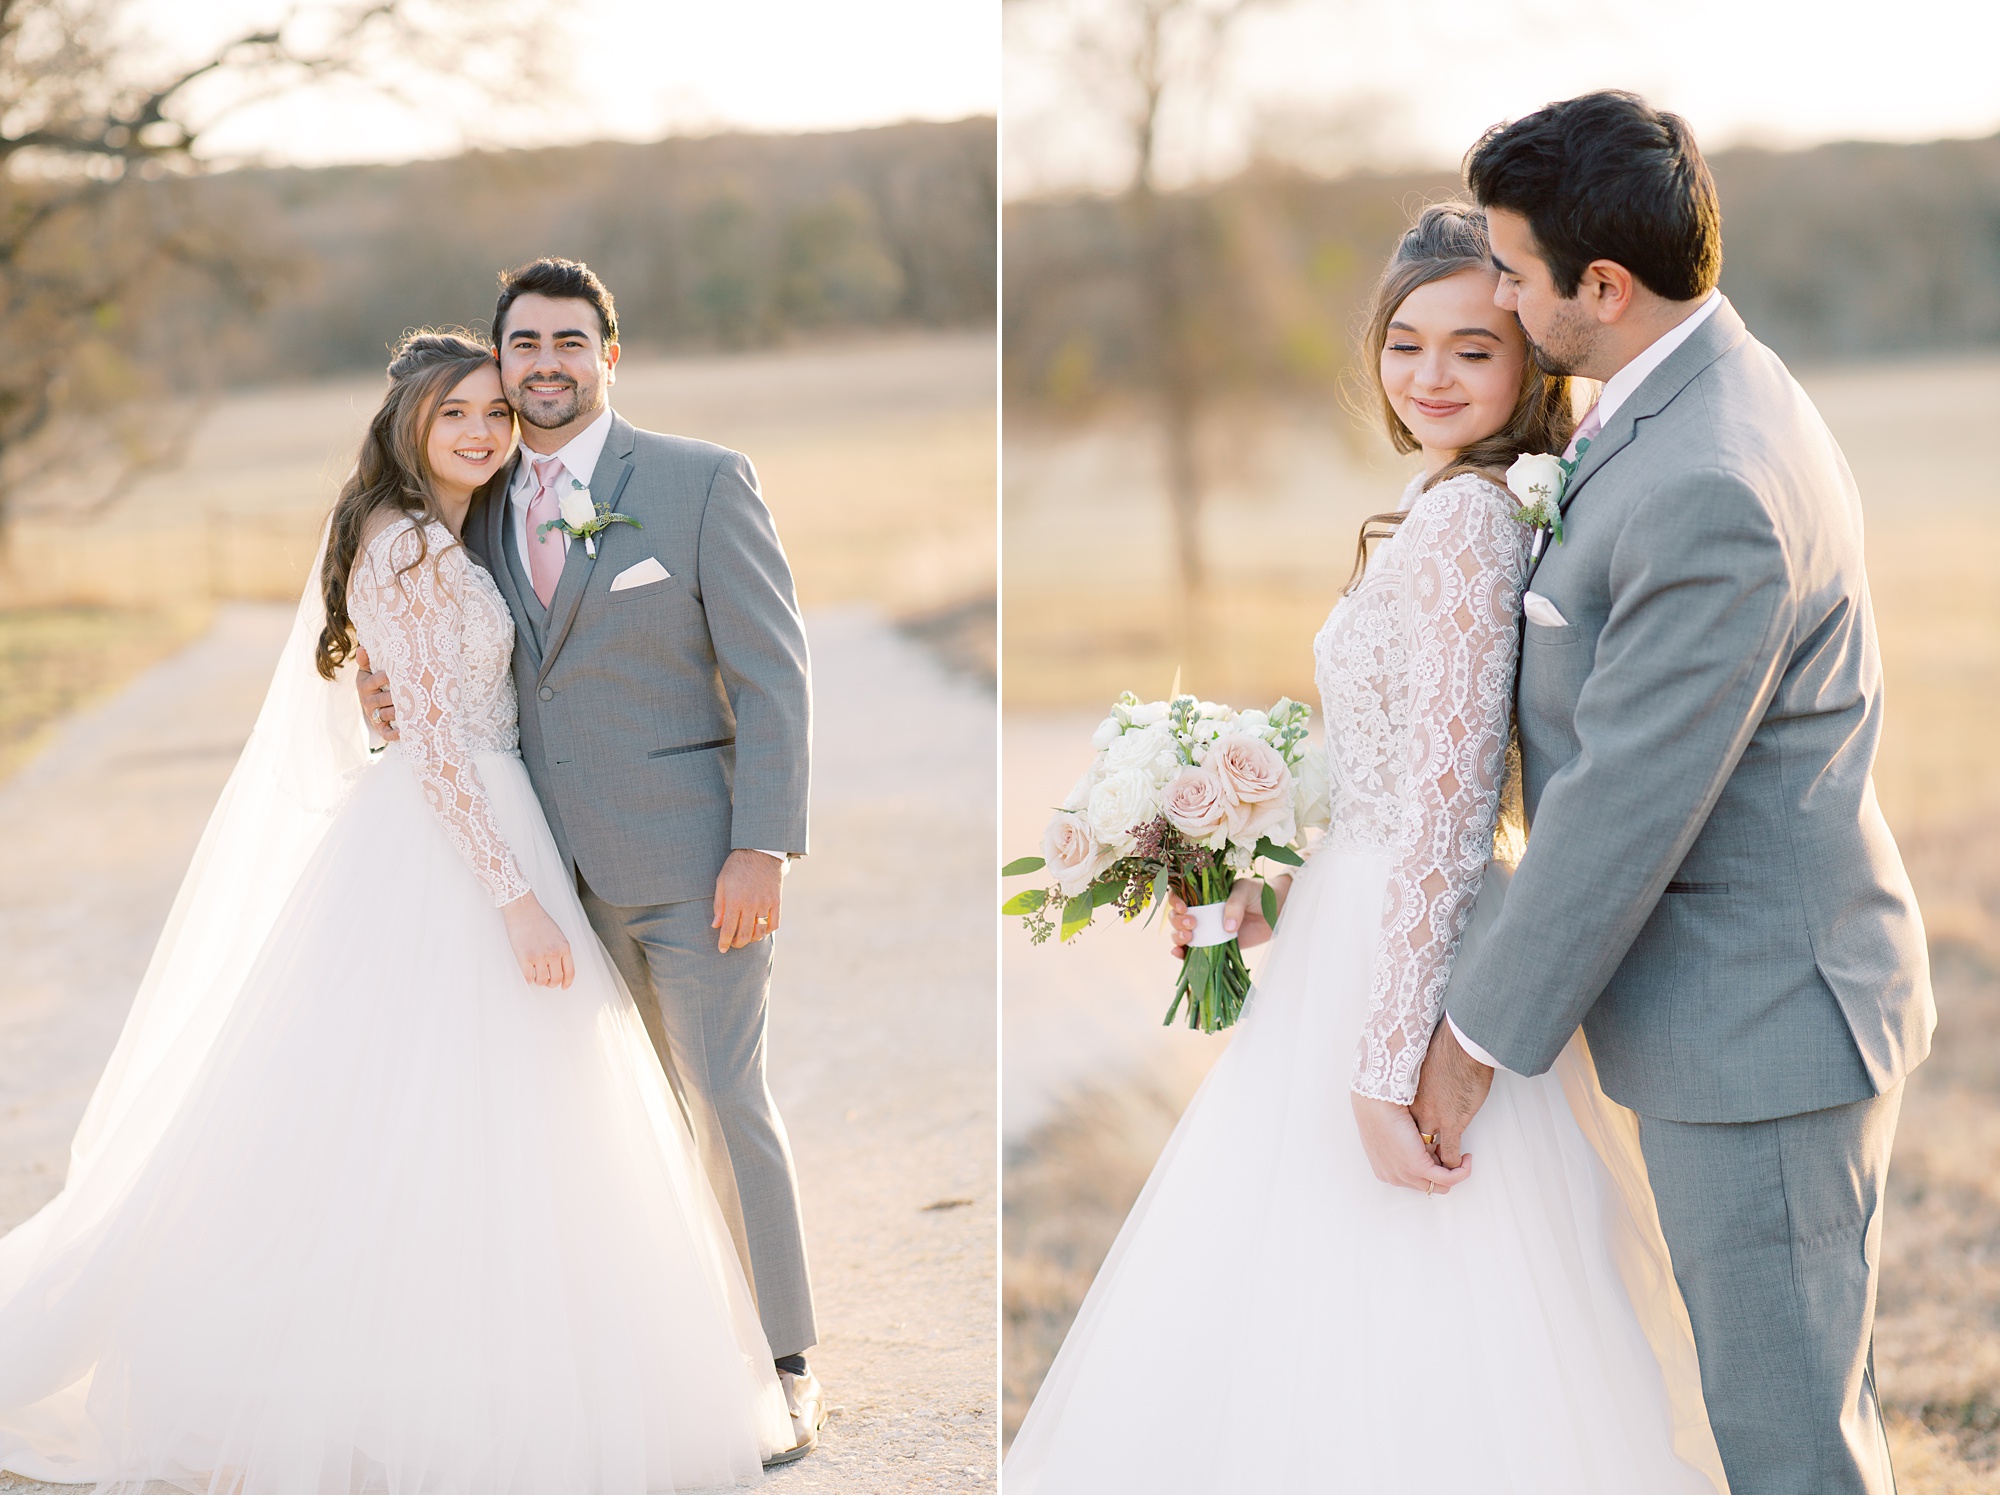 romantic wedding portraits of bride and groom at sunset